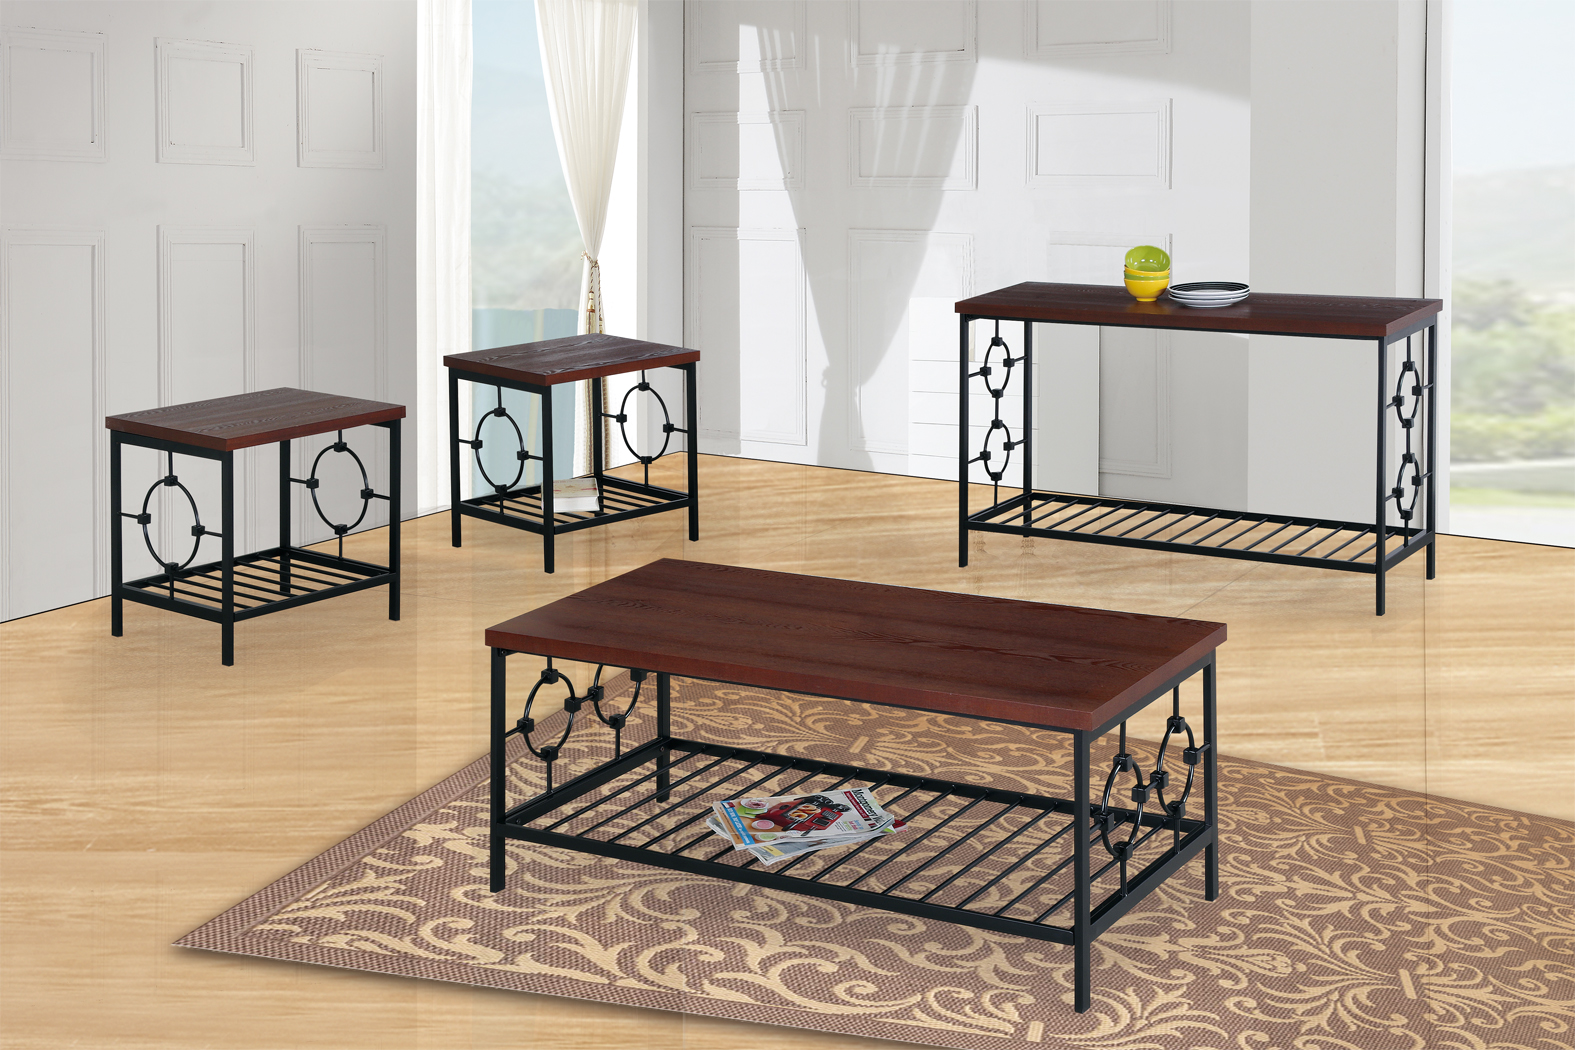 GS-CT809 3PC OCCASIONAL TABLE SET Featured Image